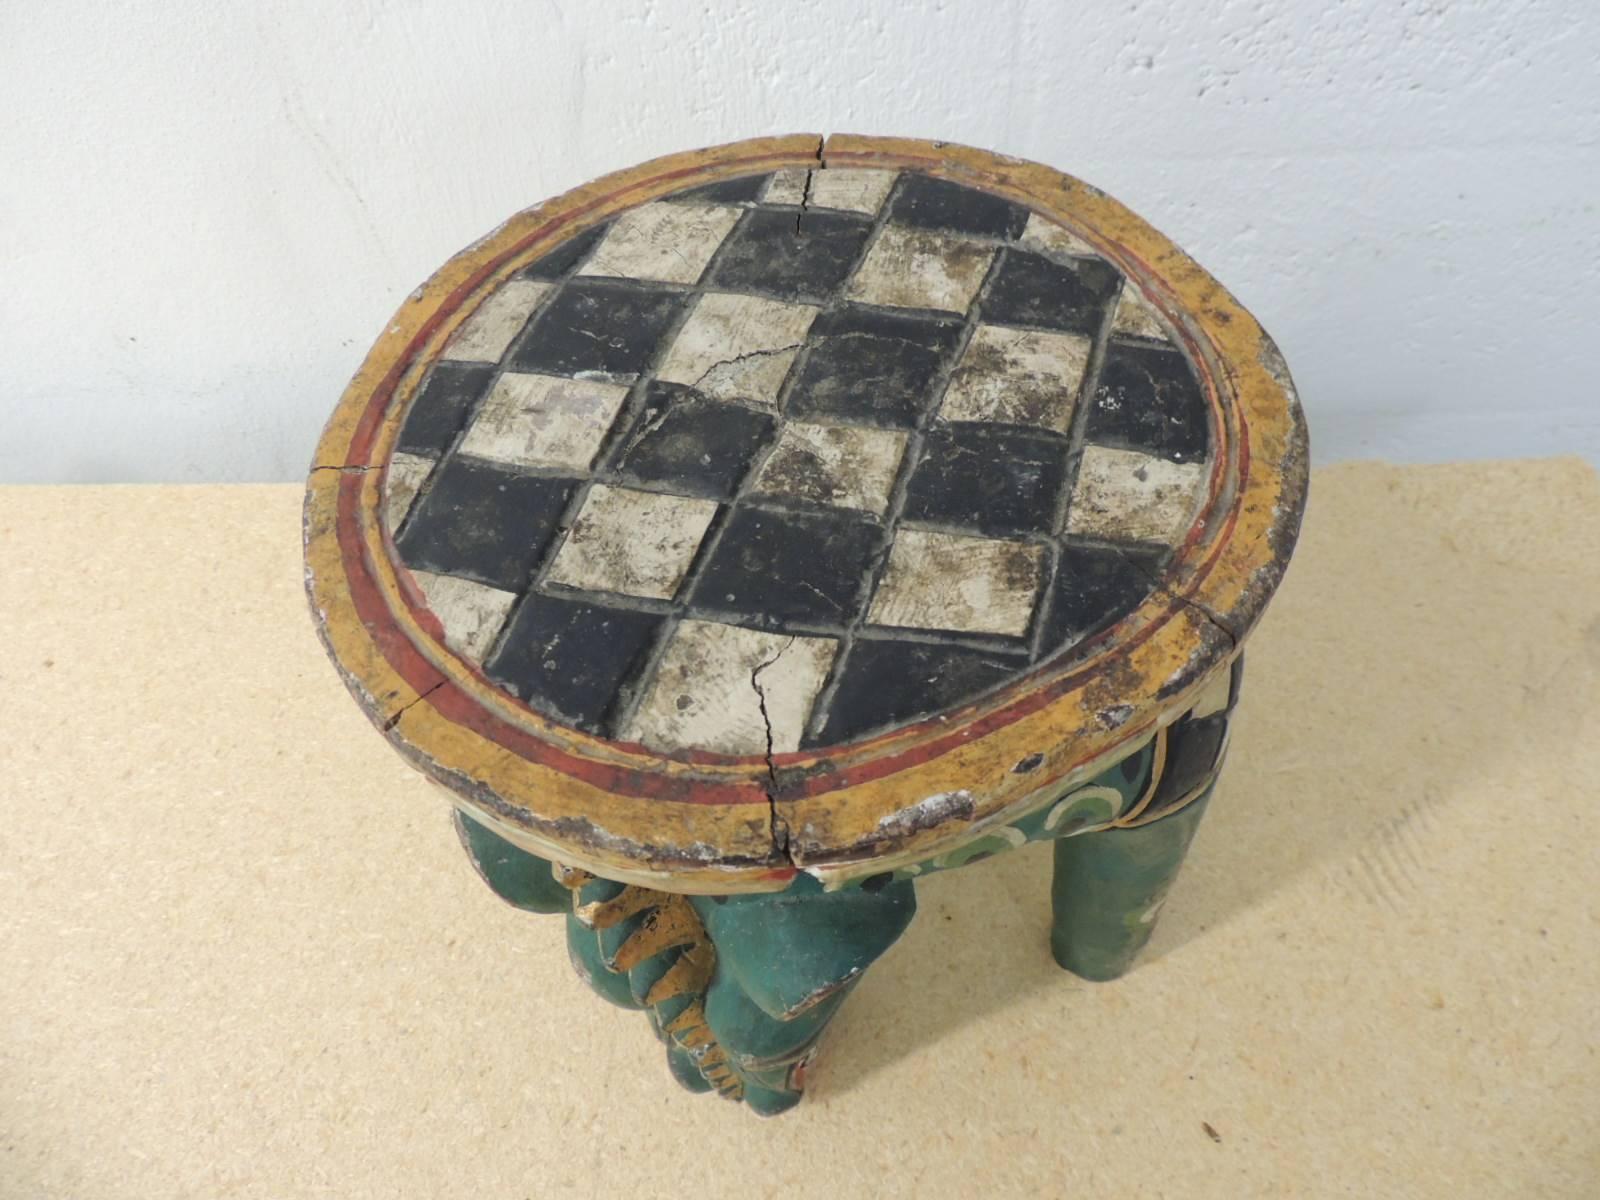 Indonesian artisanal vintage round stool Animalia style
handcrafted and hand-painted vintage Animalia style round stool with gold leaf accents and a checkerboard round design on the top. Legs carved to look like an animal. Vintage artisanal stool